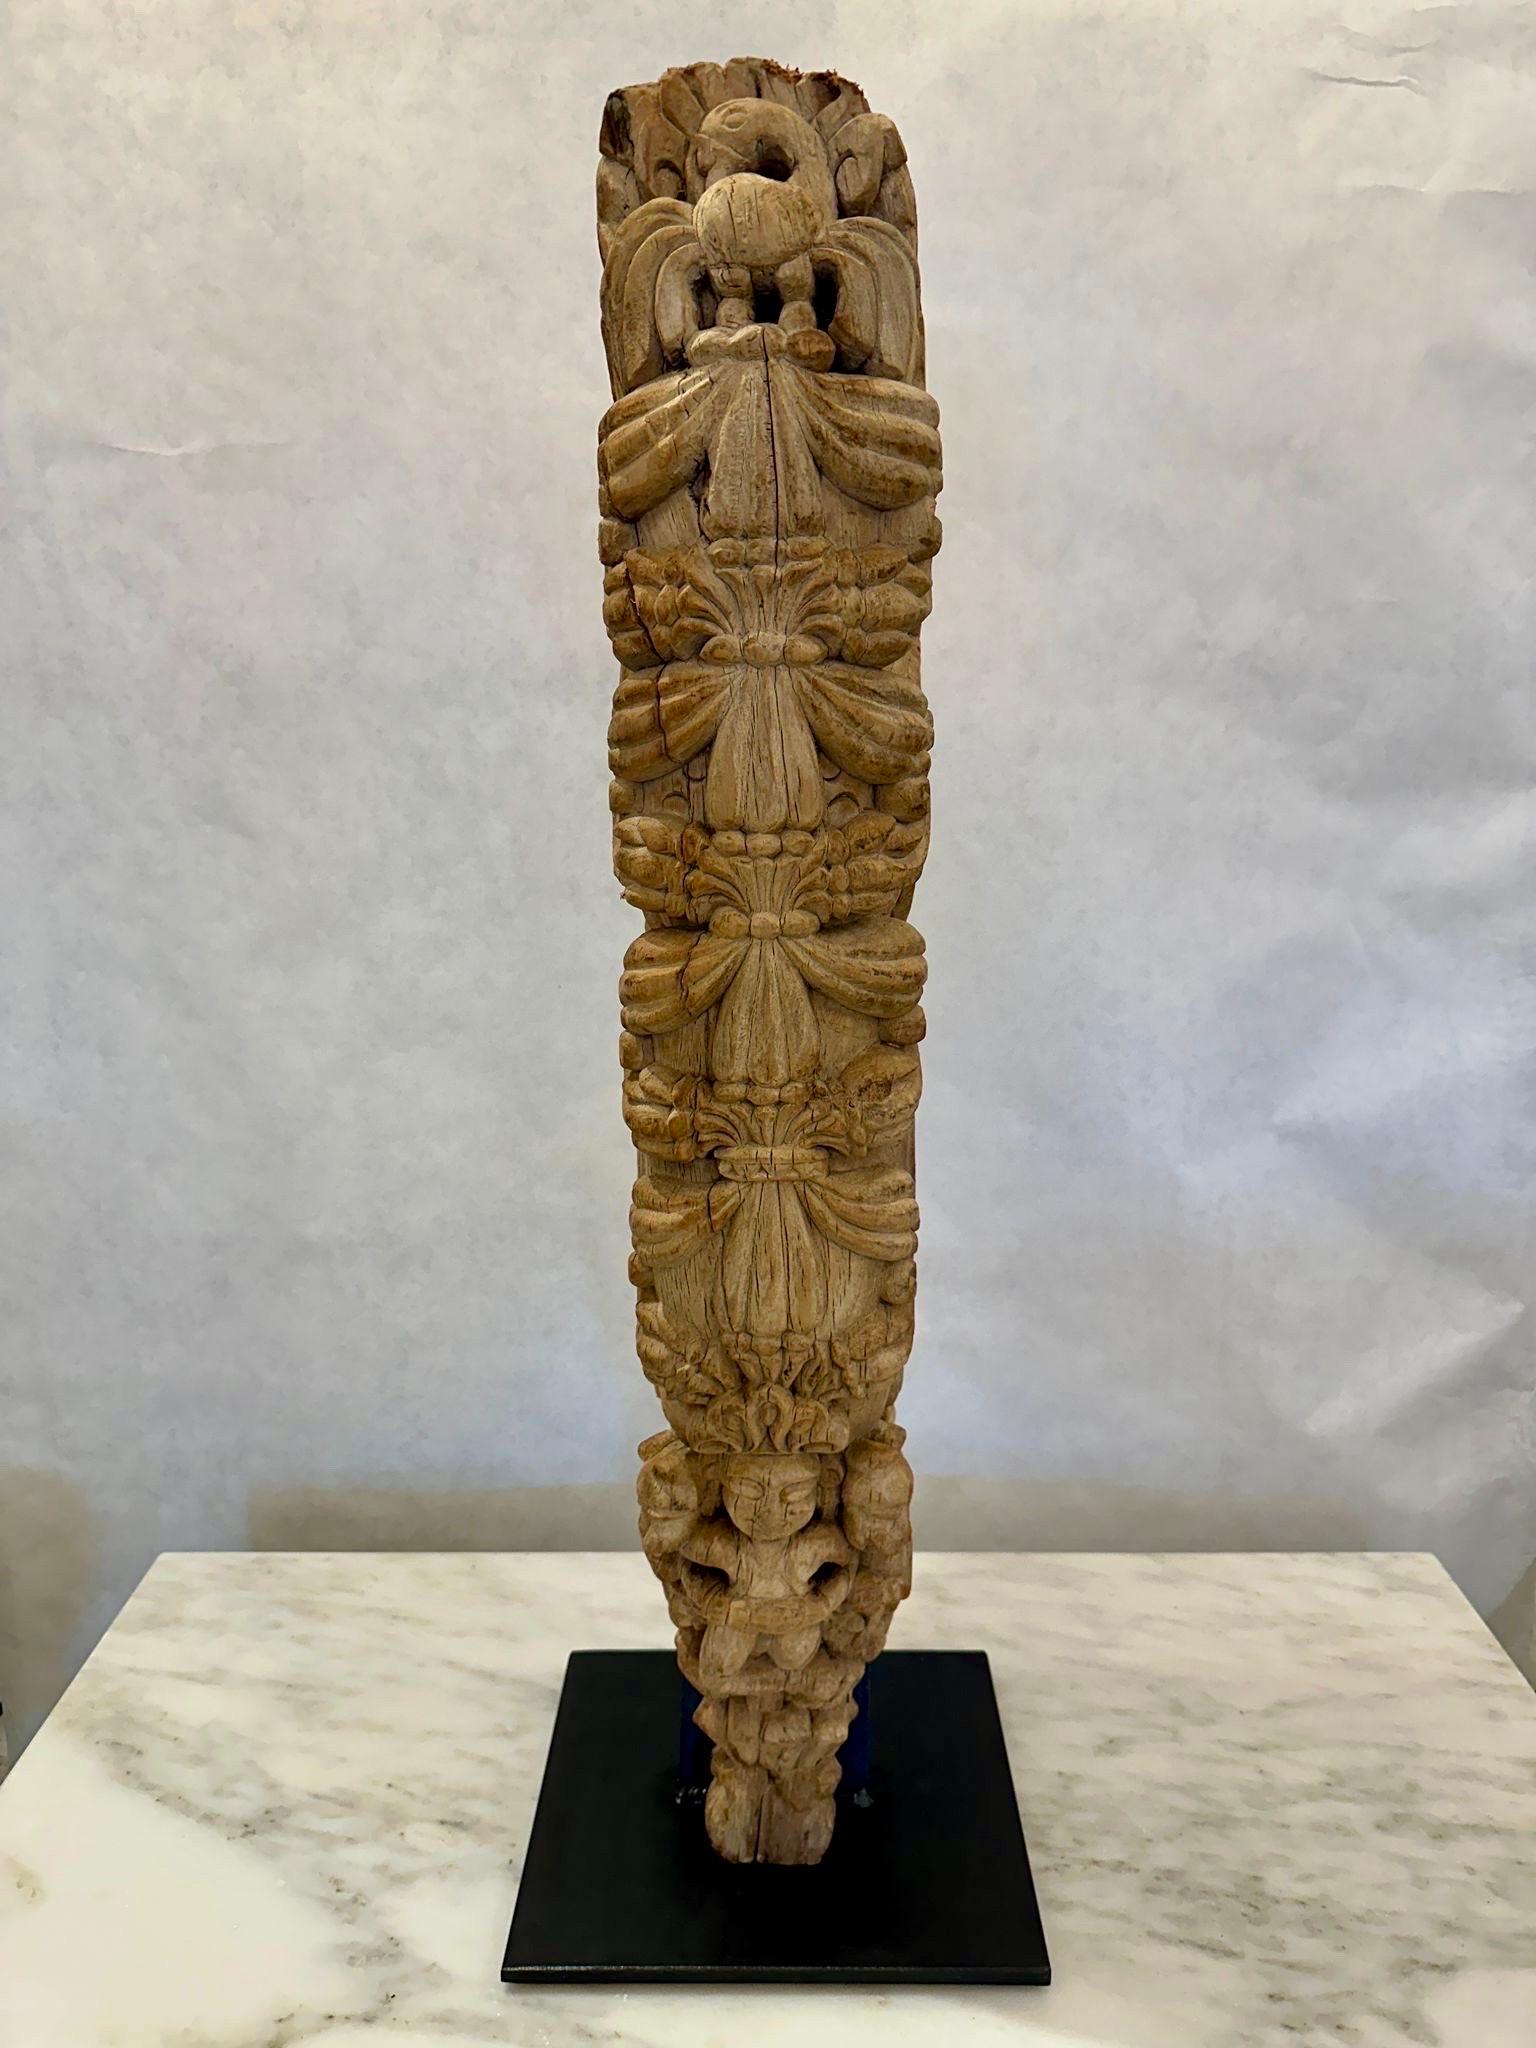 This roof mounted decorative element was salvaged from a 19th C. Balinese building and we had it professionally mounted on an iron display base so as to highlight its amazing carvings and details.  NOTE: THIS ITEM IS LOCATED AND WILL SHIP FROM OUR